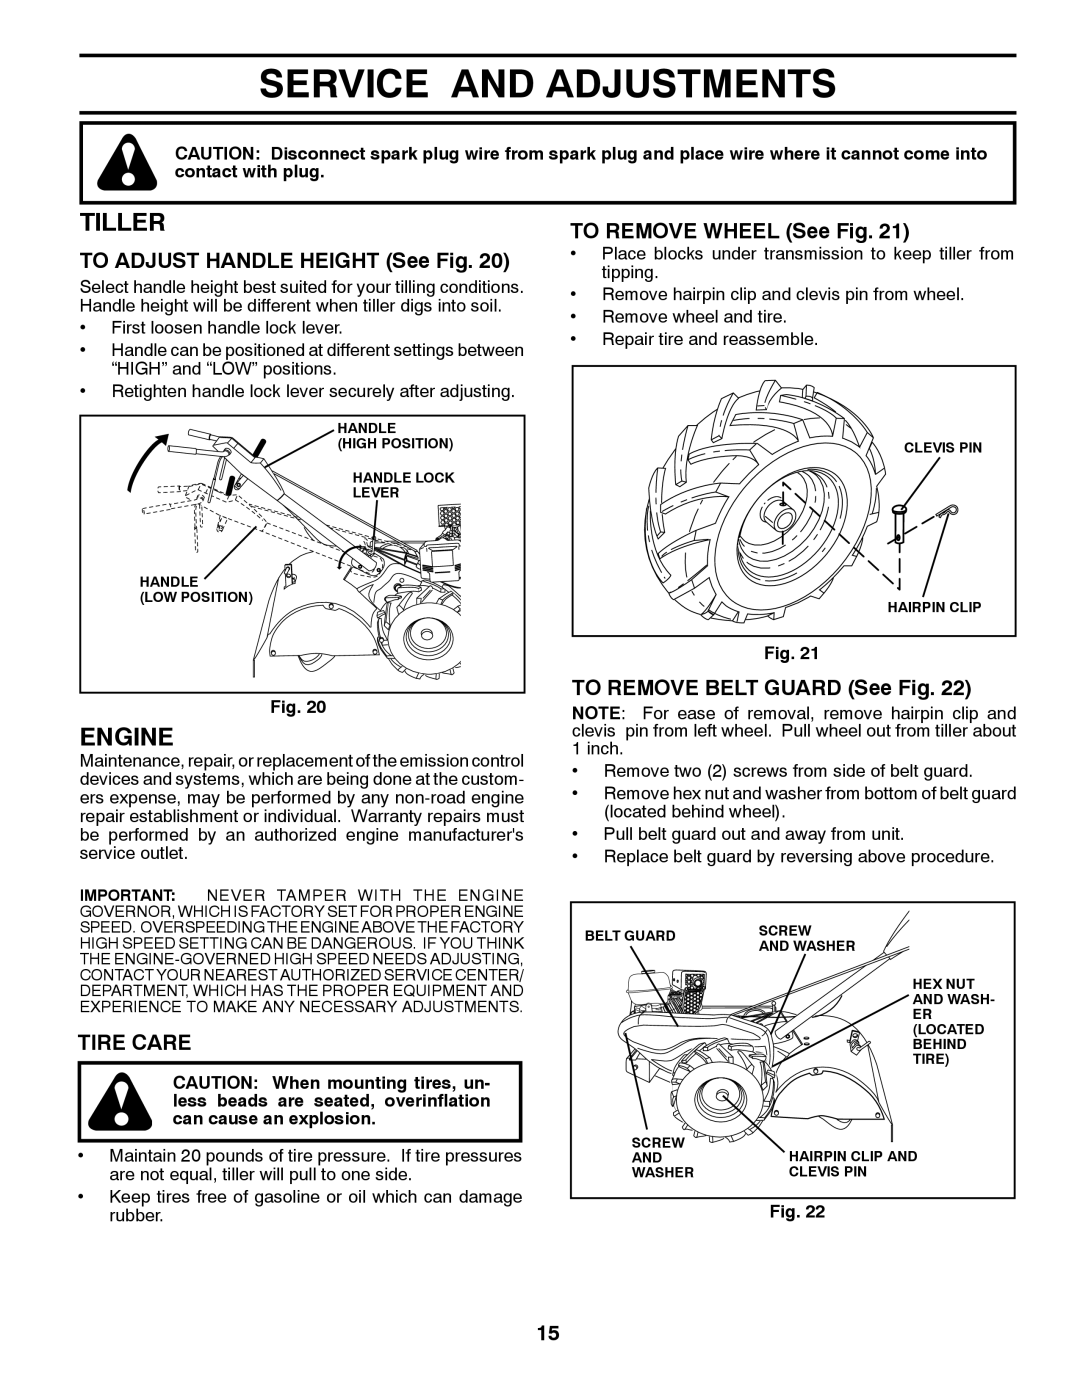 Husqvarna RTT900 Service And Adjustments, Tiller, TO ADJUST HANDLE HEIGHT See Fig, Tire Care, TO REMOVE WHEEL See Fig 